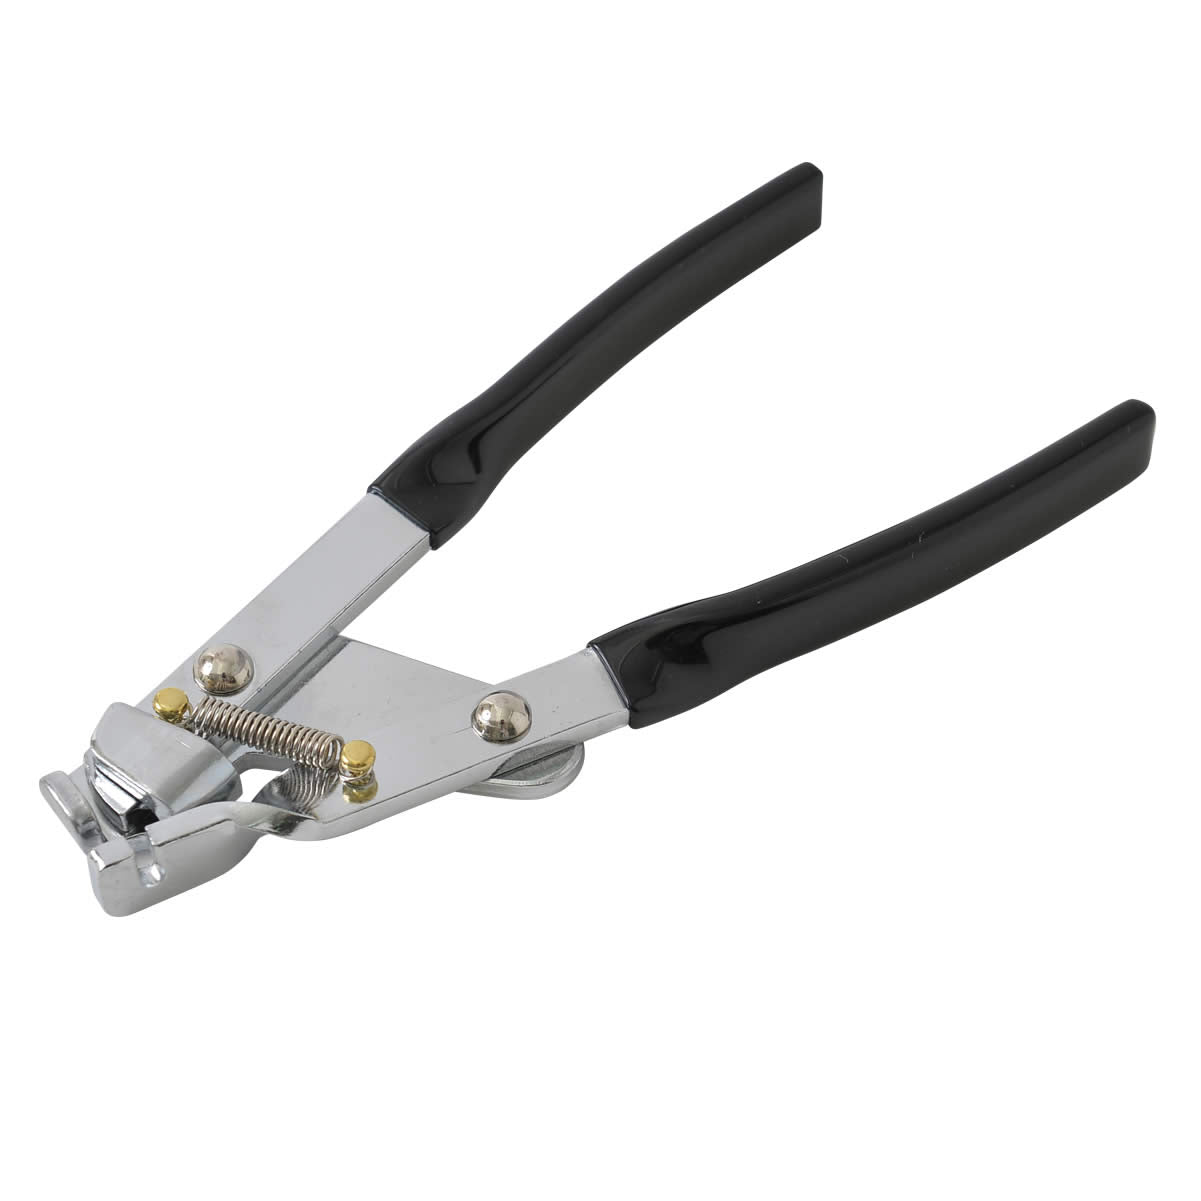 Hozan C-356 Cable Puller